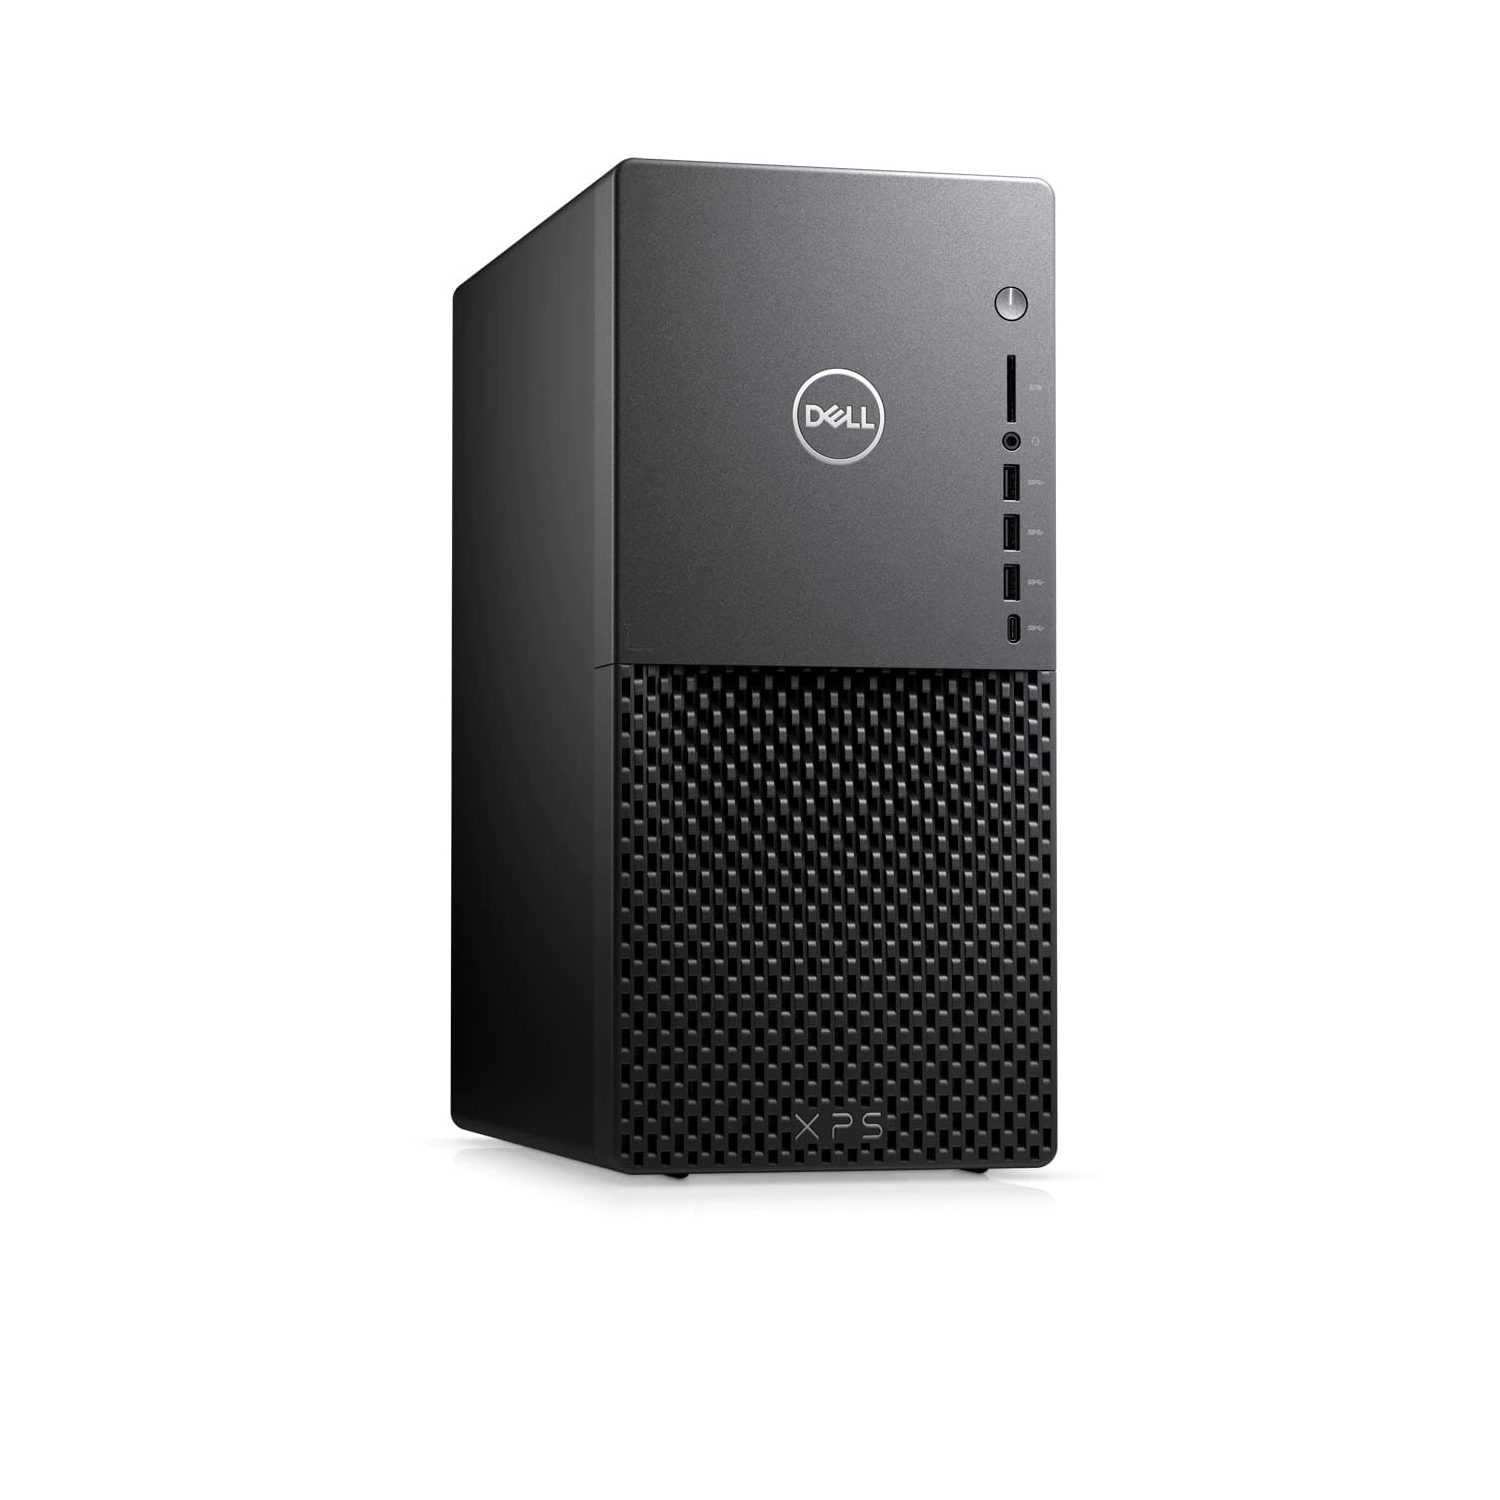 Refurbished (Excellent) - Dell XPS 8940 Desktop (2020) | Core i7 - 1TB HDD + 512GB SSD - 16GB RAM - 3060 Ti | 8 Cores @ 4.8 GHz - 10th Gen CPU Certified Refurbished